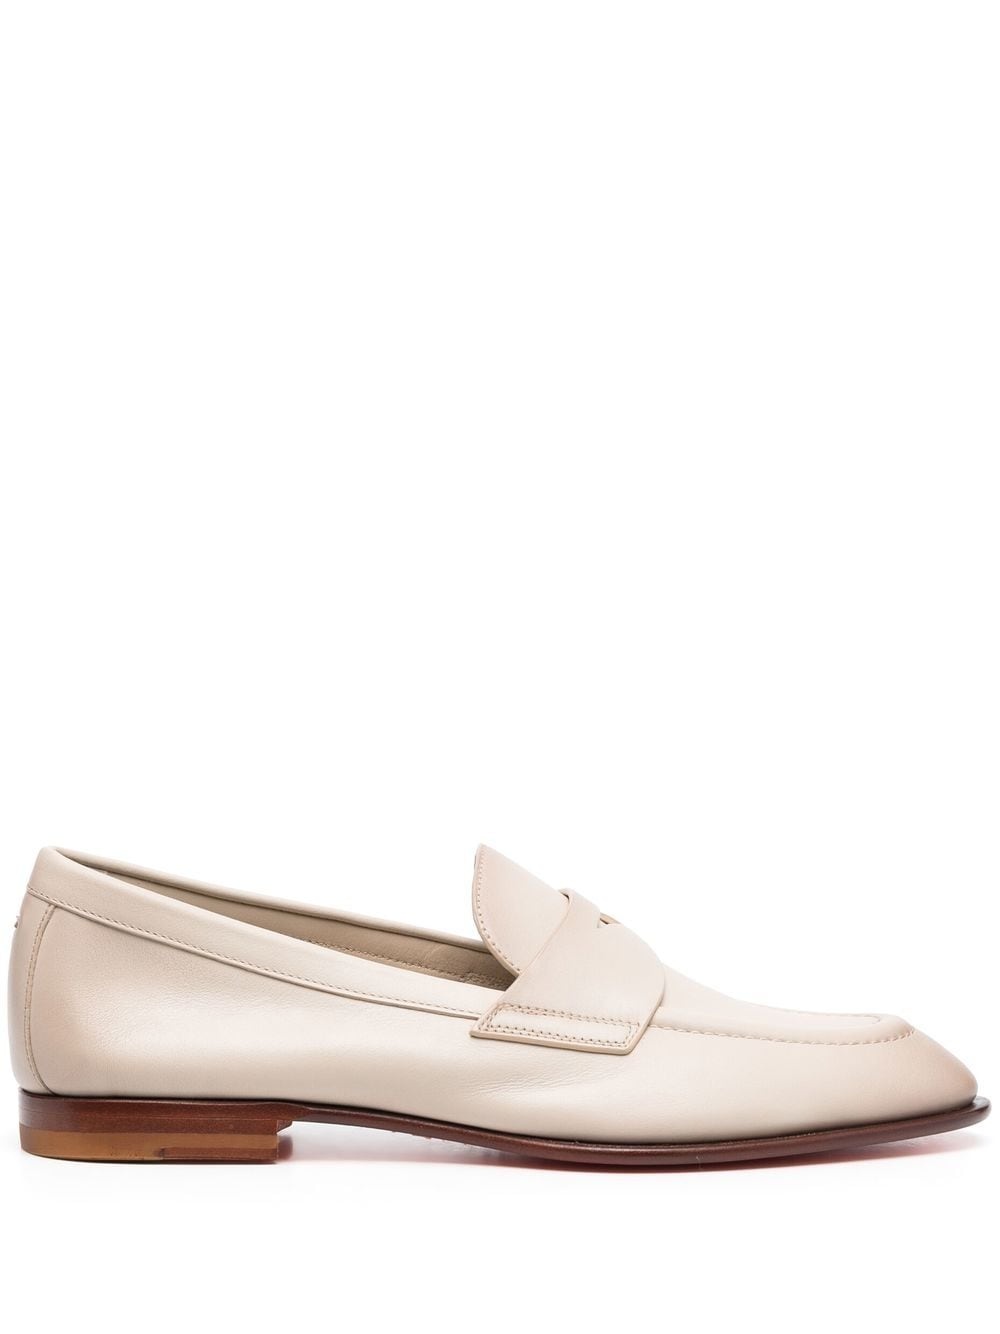 leather penny loafers - 1